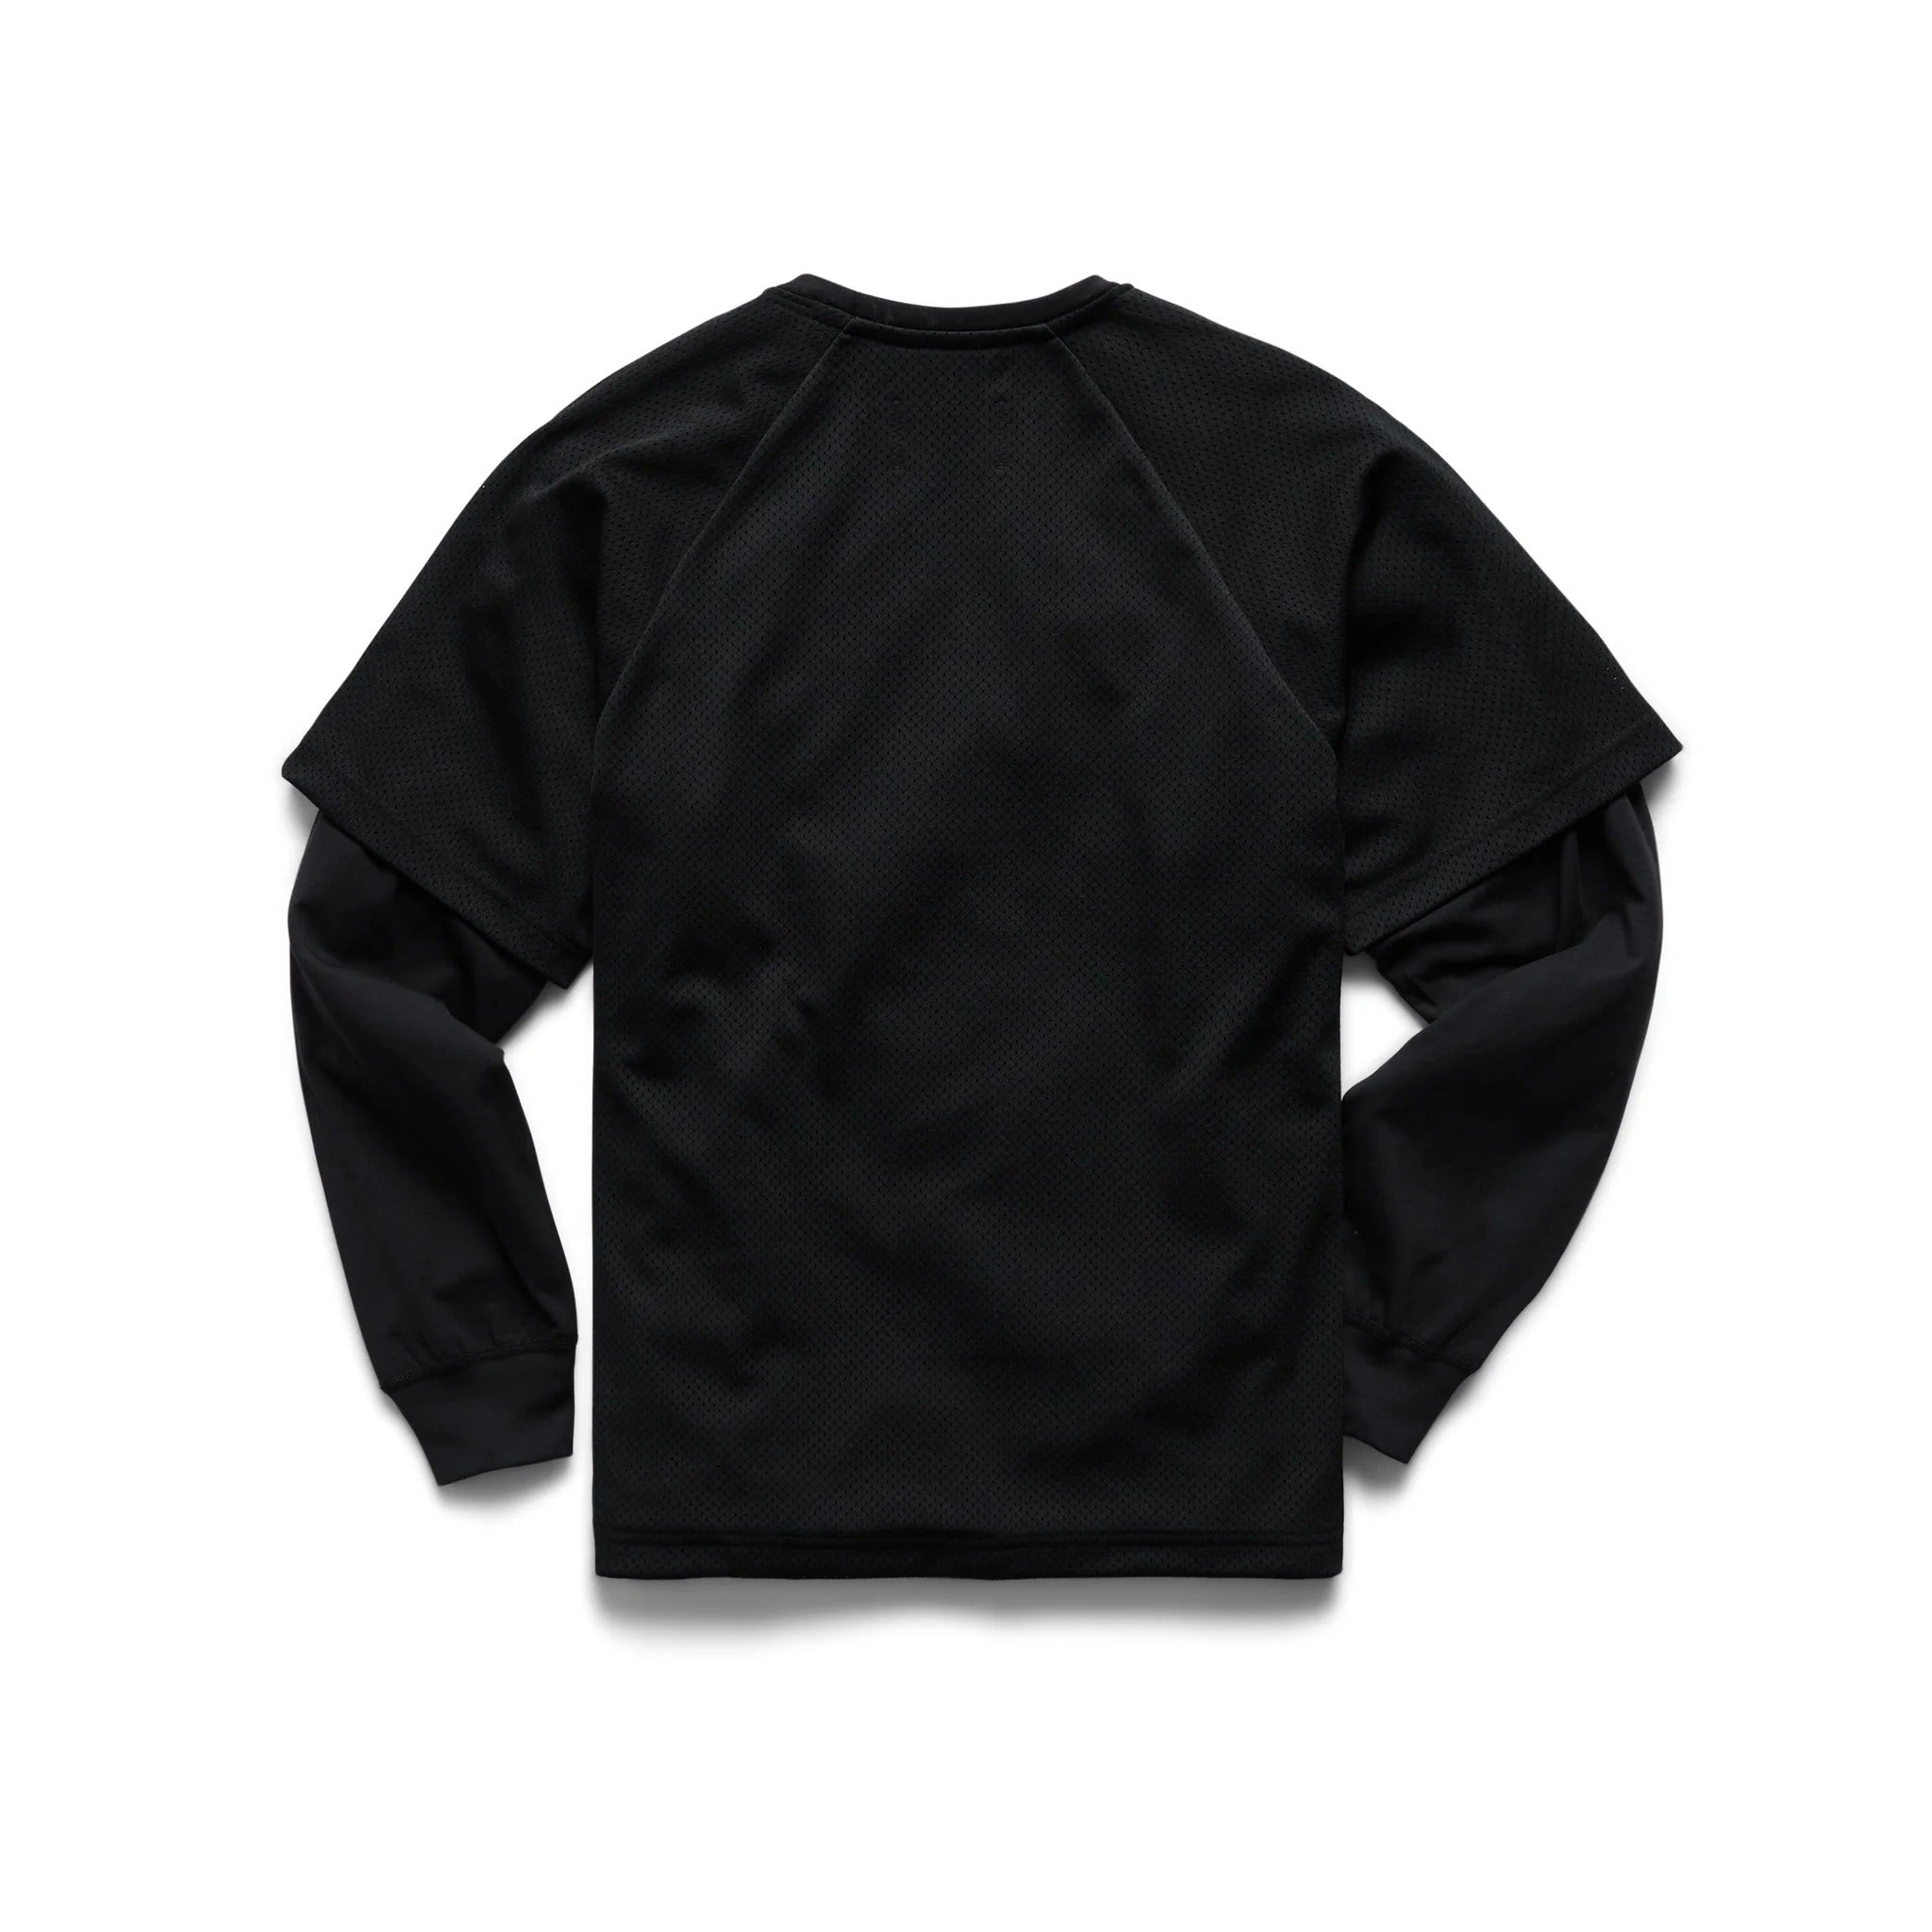 Reigning Champ Men Knit Athletic Mesh S04 2-Layer Mesh Crewneck Black RC-2240-BLK - SWEATERS - Canada